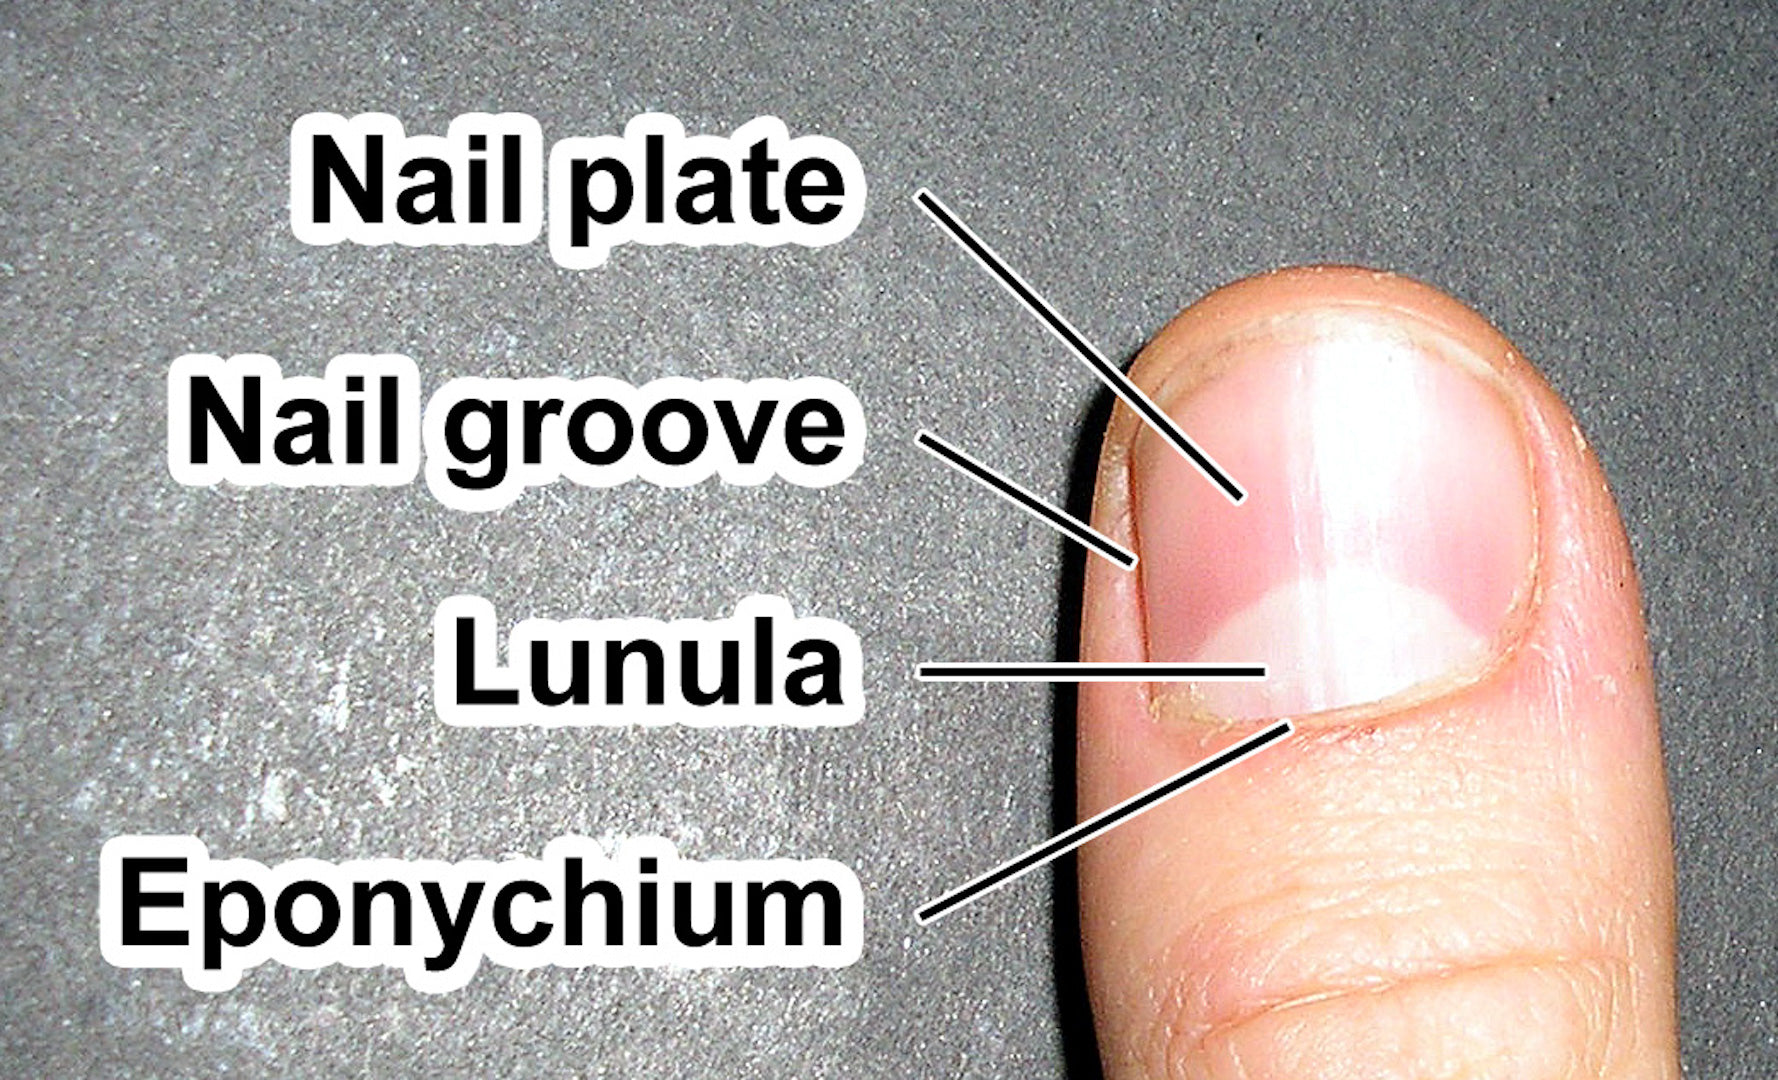 Do I have nail fungus? Signs you have a nail infection.